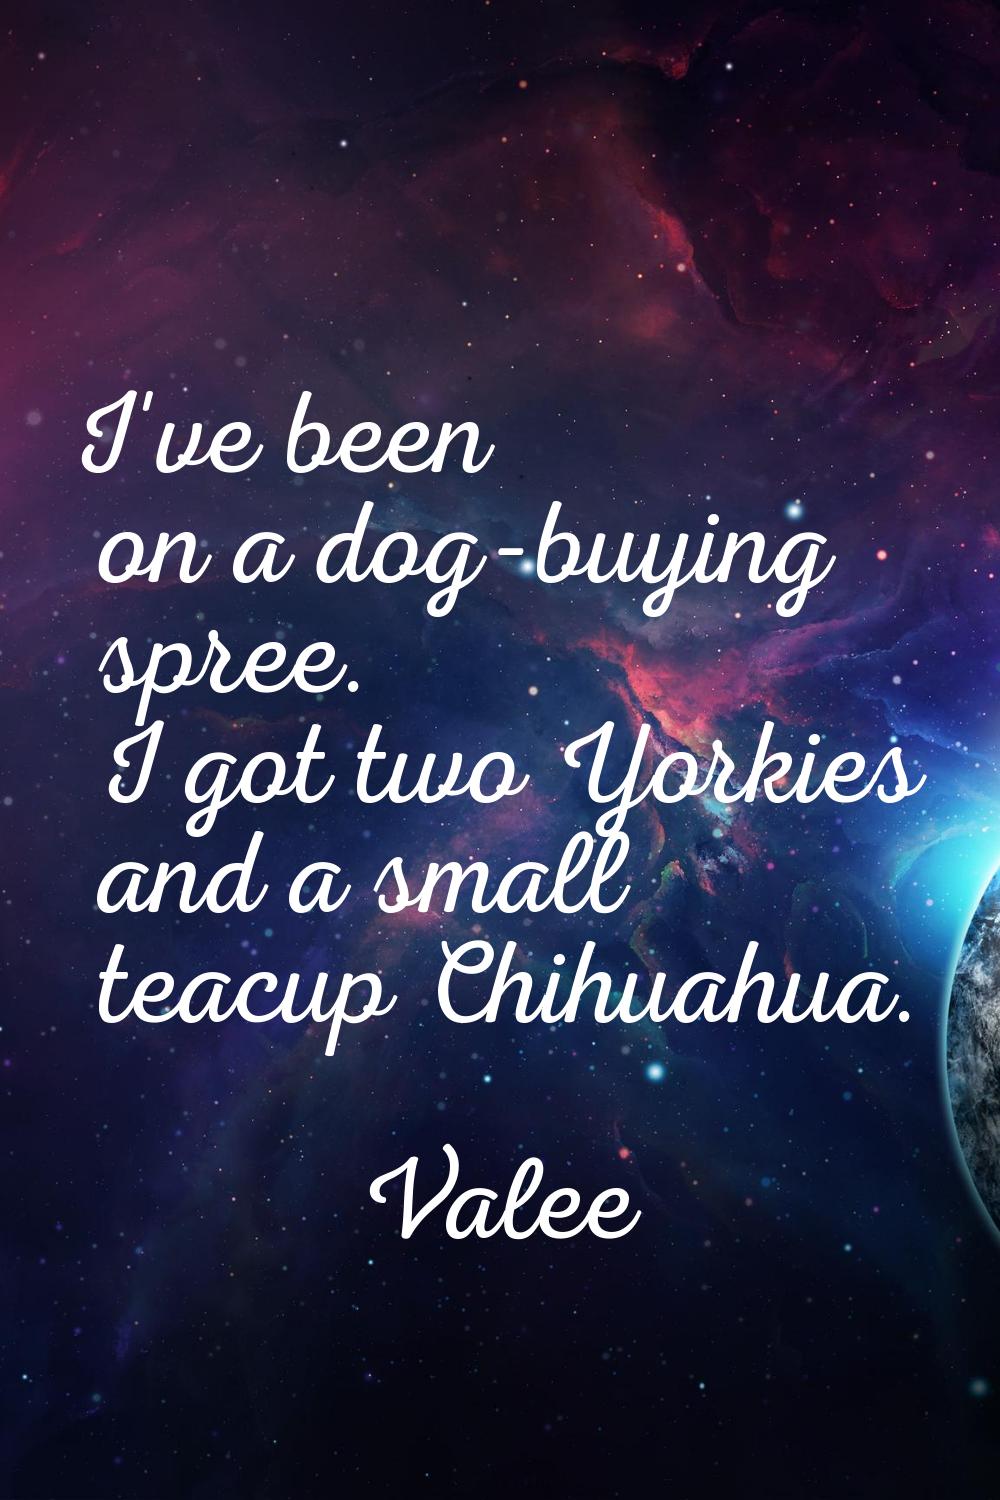 I've been on a dog-buying spree. I got two Yorkies and a small teacup Chihuahua.